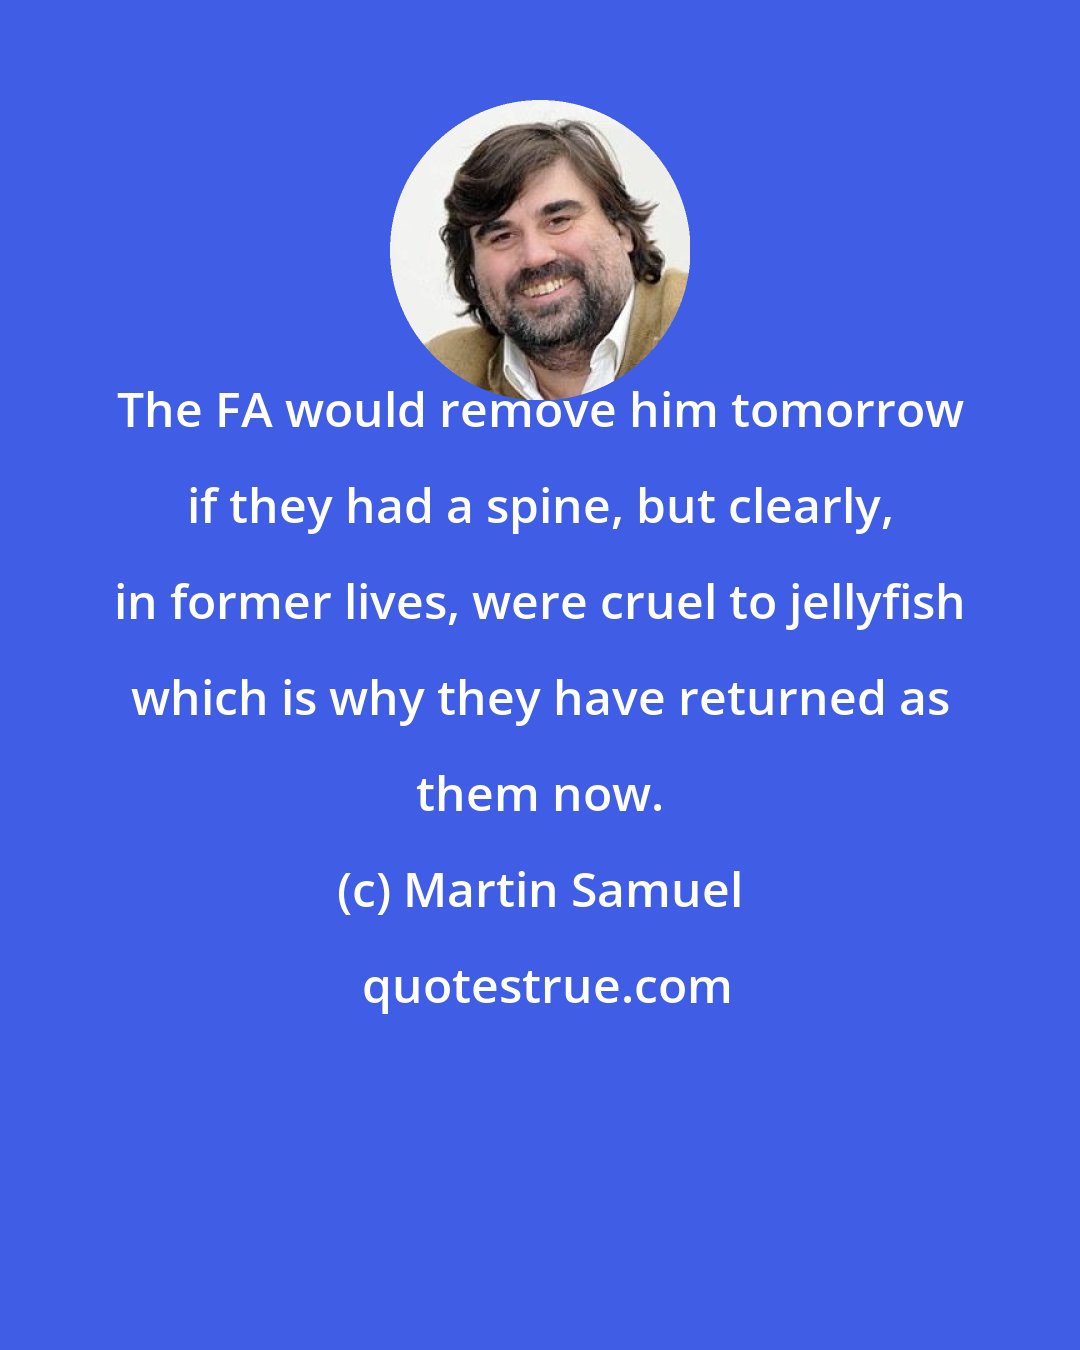 Martin Samuel: The FA would remove him tomorrow if they had a spine, but clearly, in former lives, were cruel to jellyfish which is why they have returned as them now.